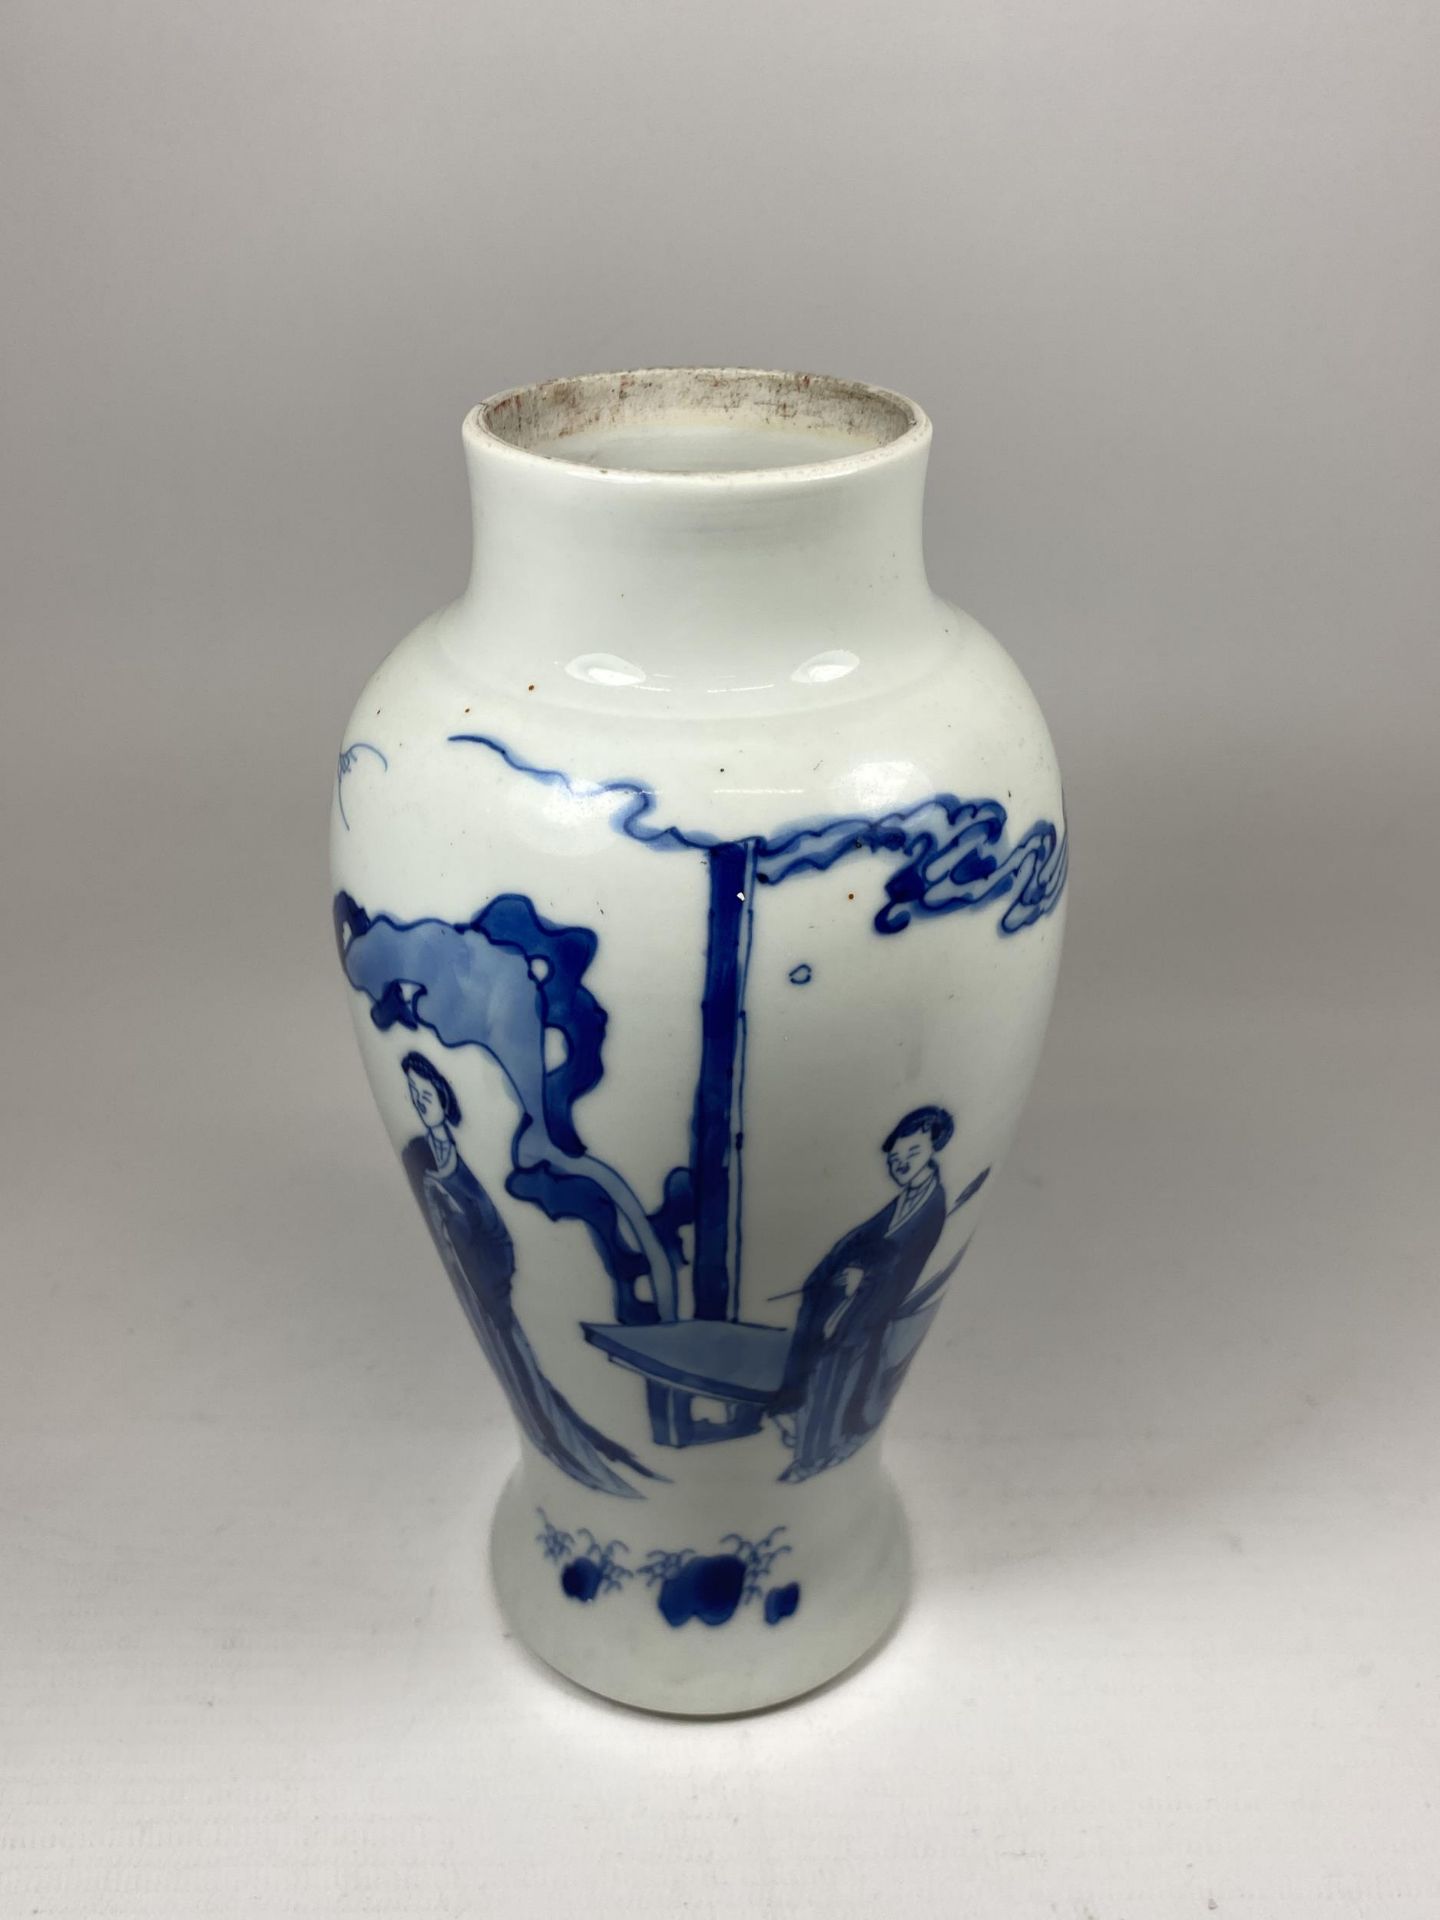 A CHINESE KANGXI PERIOD (1661-1722) BLUE AND WHITE PORCELAIN BALUSTER FORM VASE DEPICTING FIGURES IN - Image 2 of 8